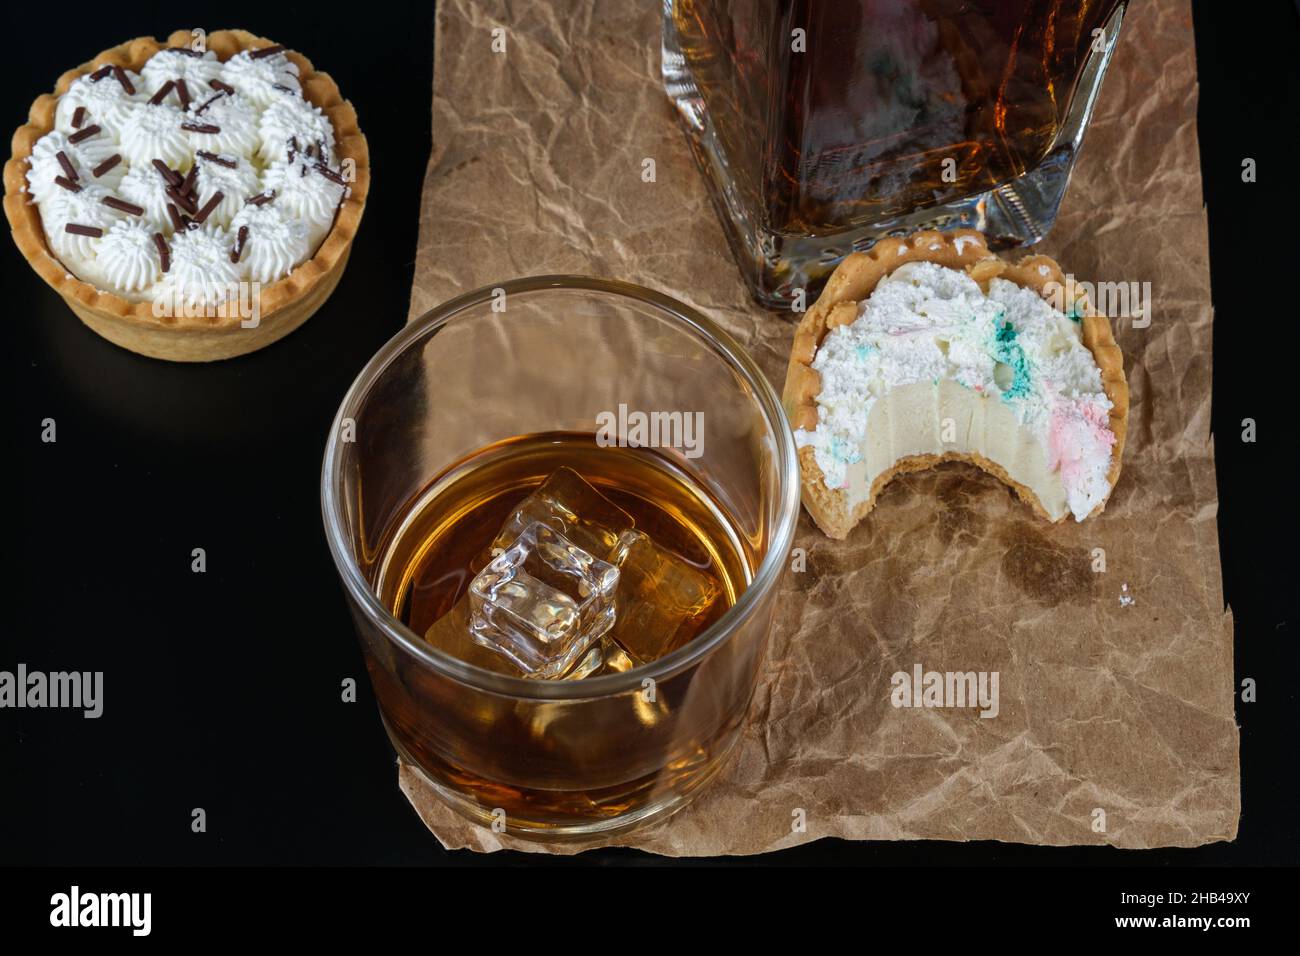 Ice in whiskey glass, surrounded by mini ganache pies and whiskey bottle. Stock Photo